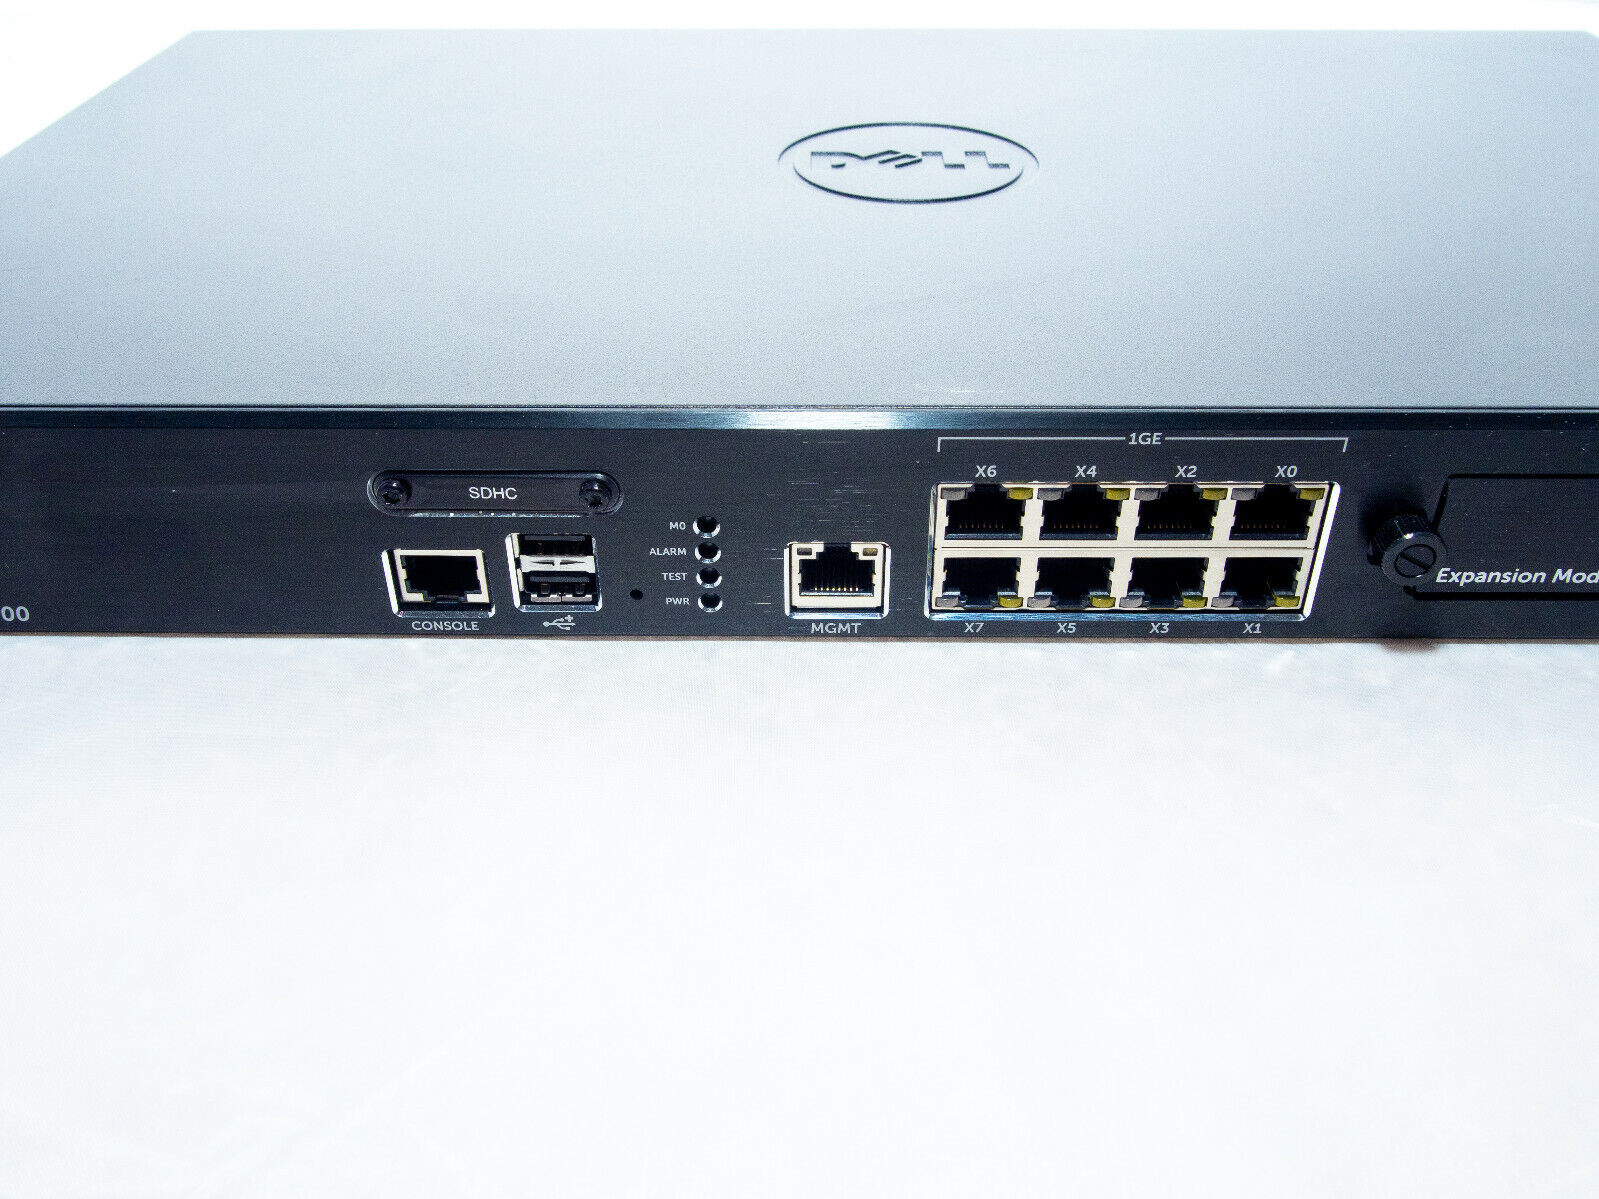 Dell SonicWALL NSA 2600 8-Port Network Security Appliance Switch